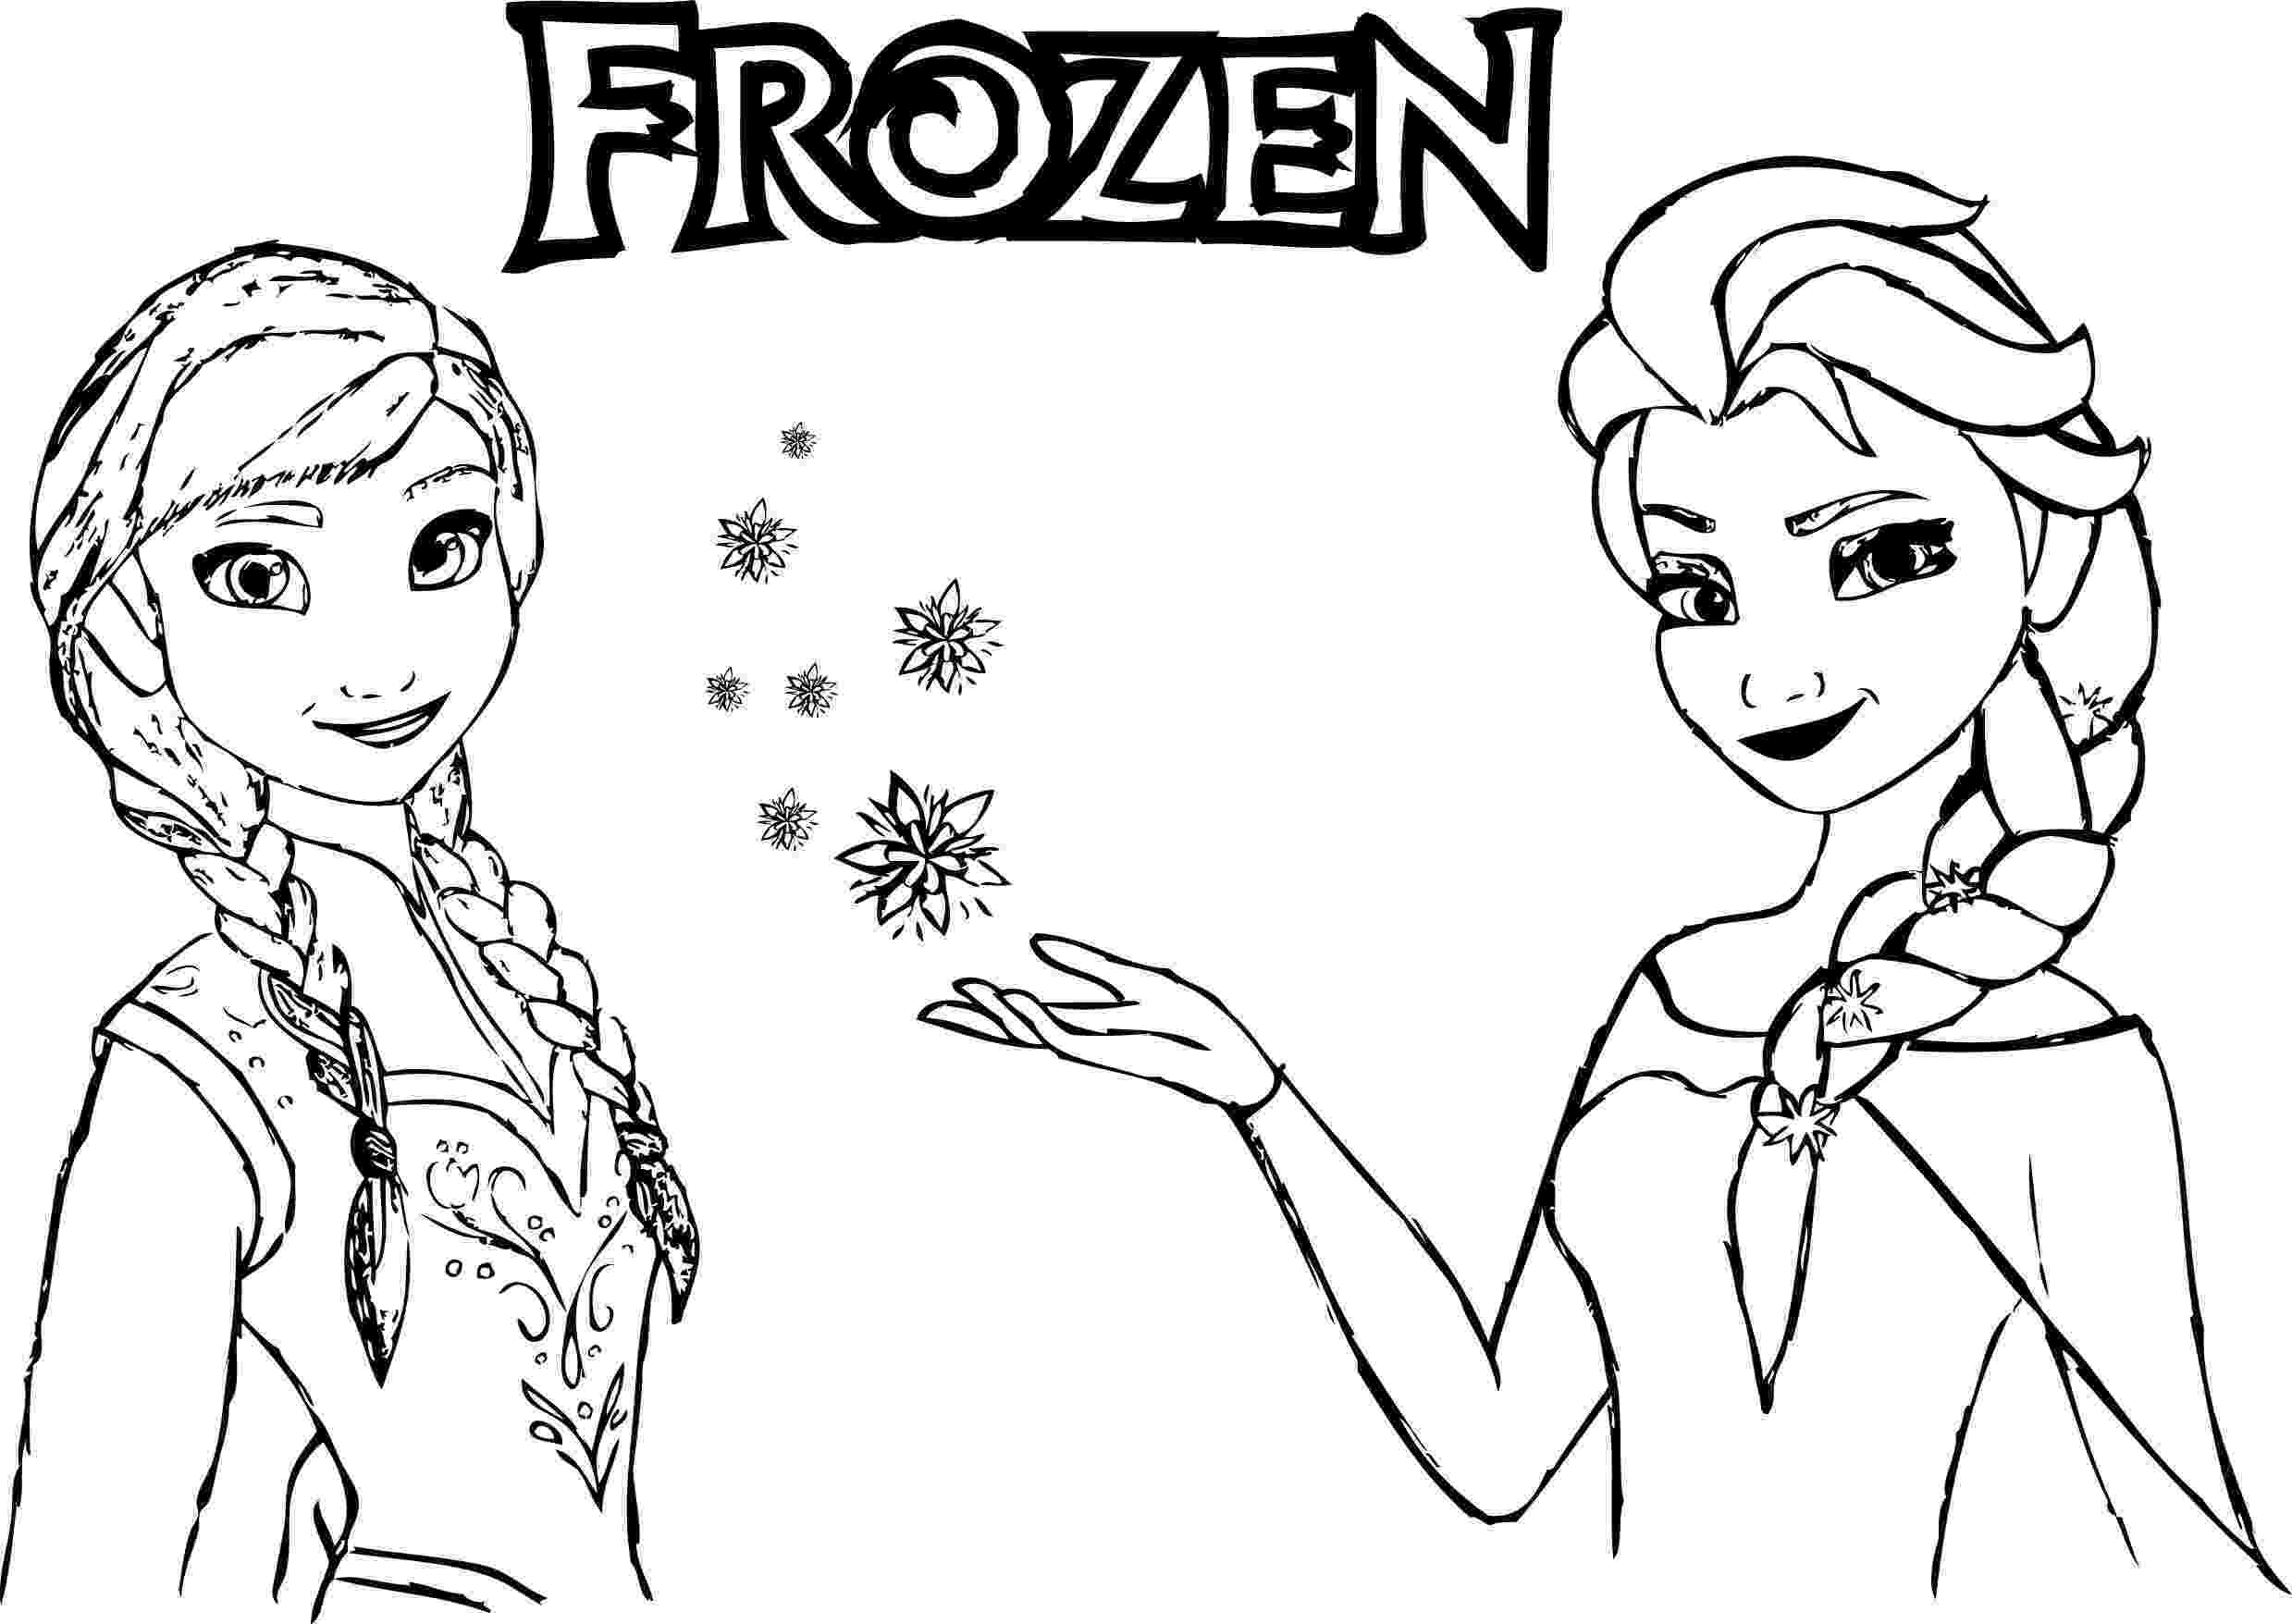 frozen coloring books free printable coloring pages frozen 2015 frozen books coloring 